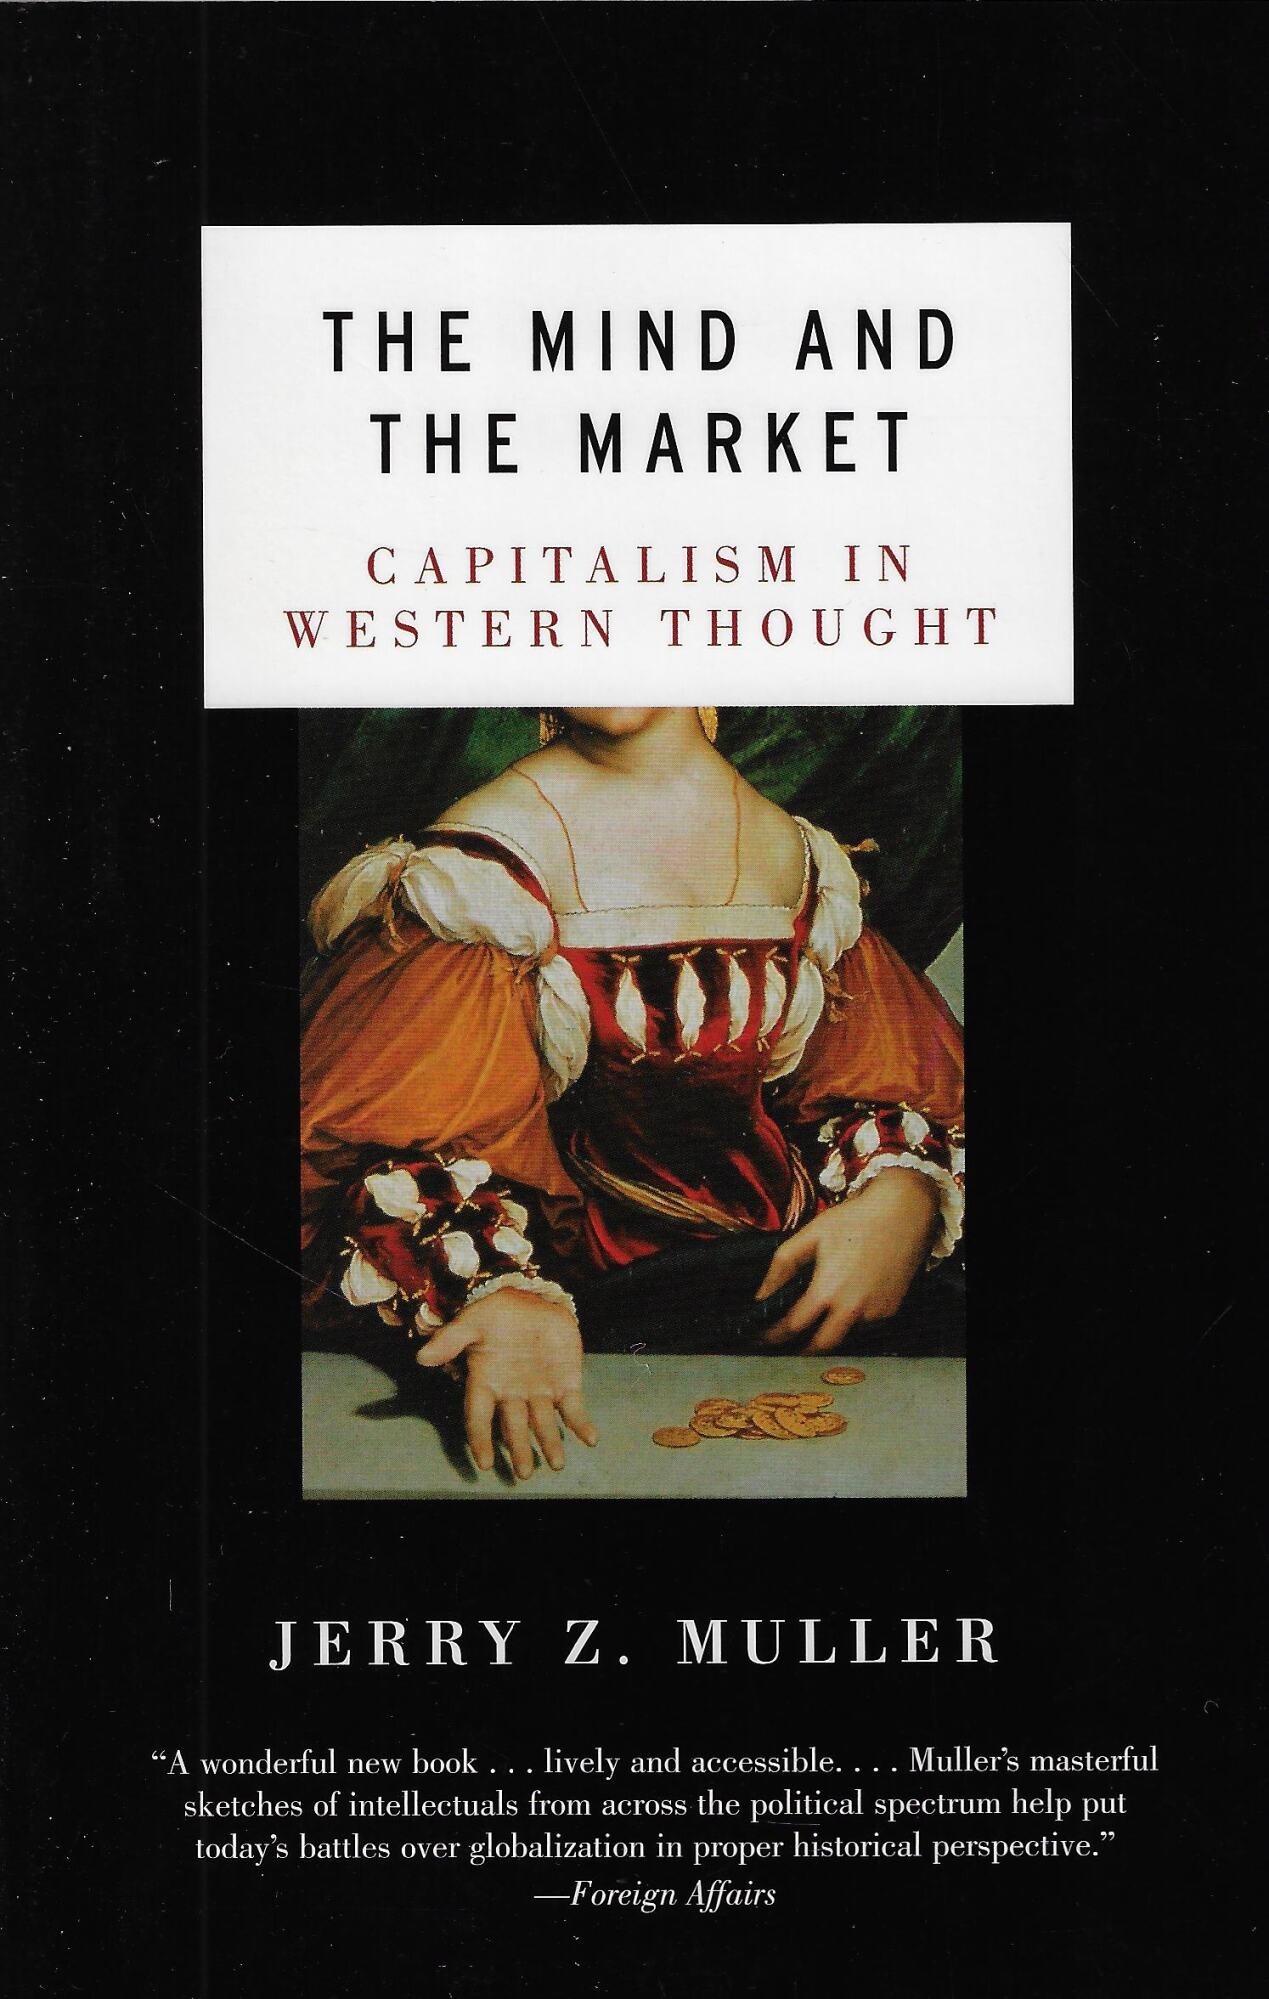 The Mind and the Market: Capitalism in Western Thought